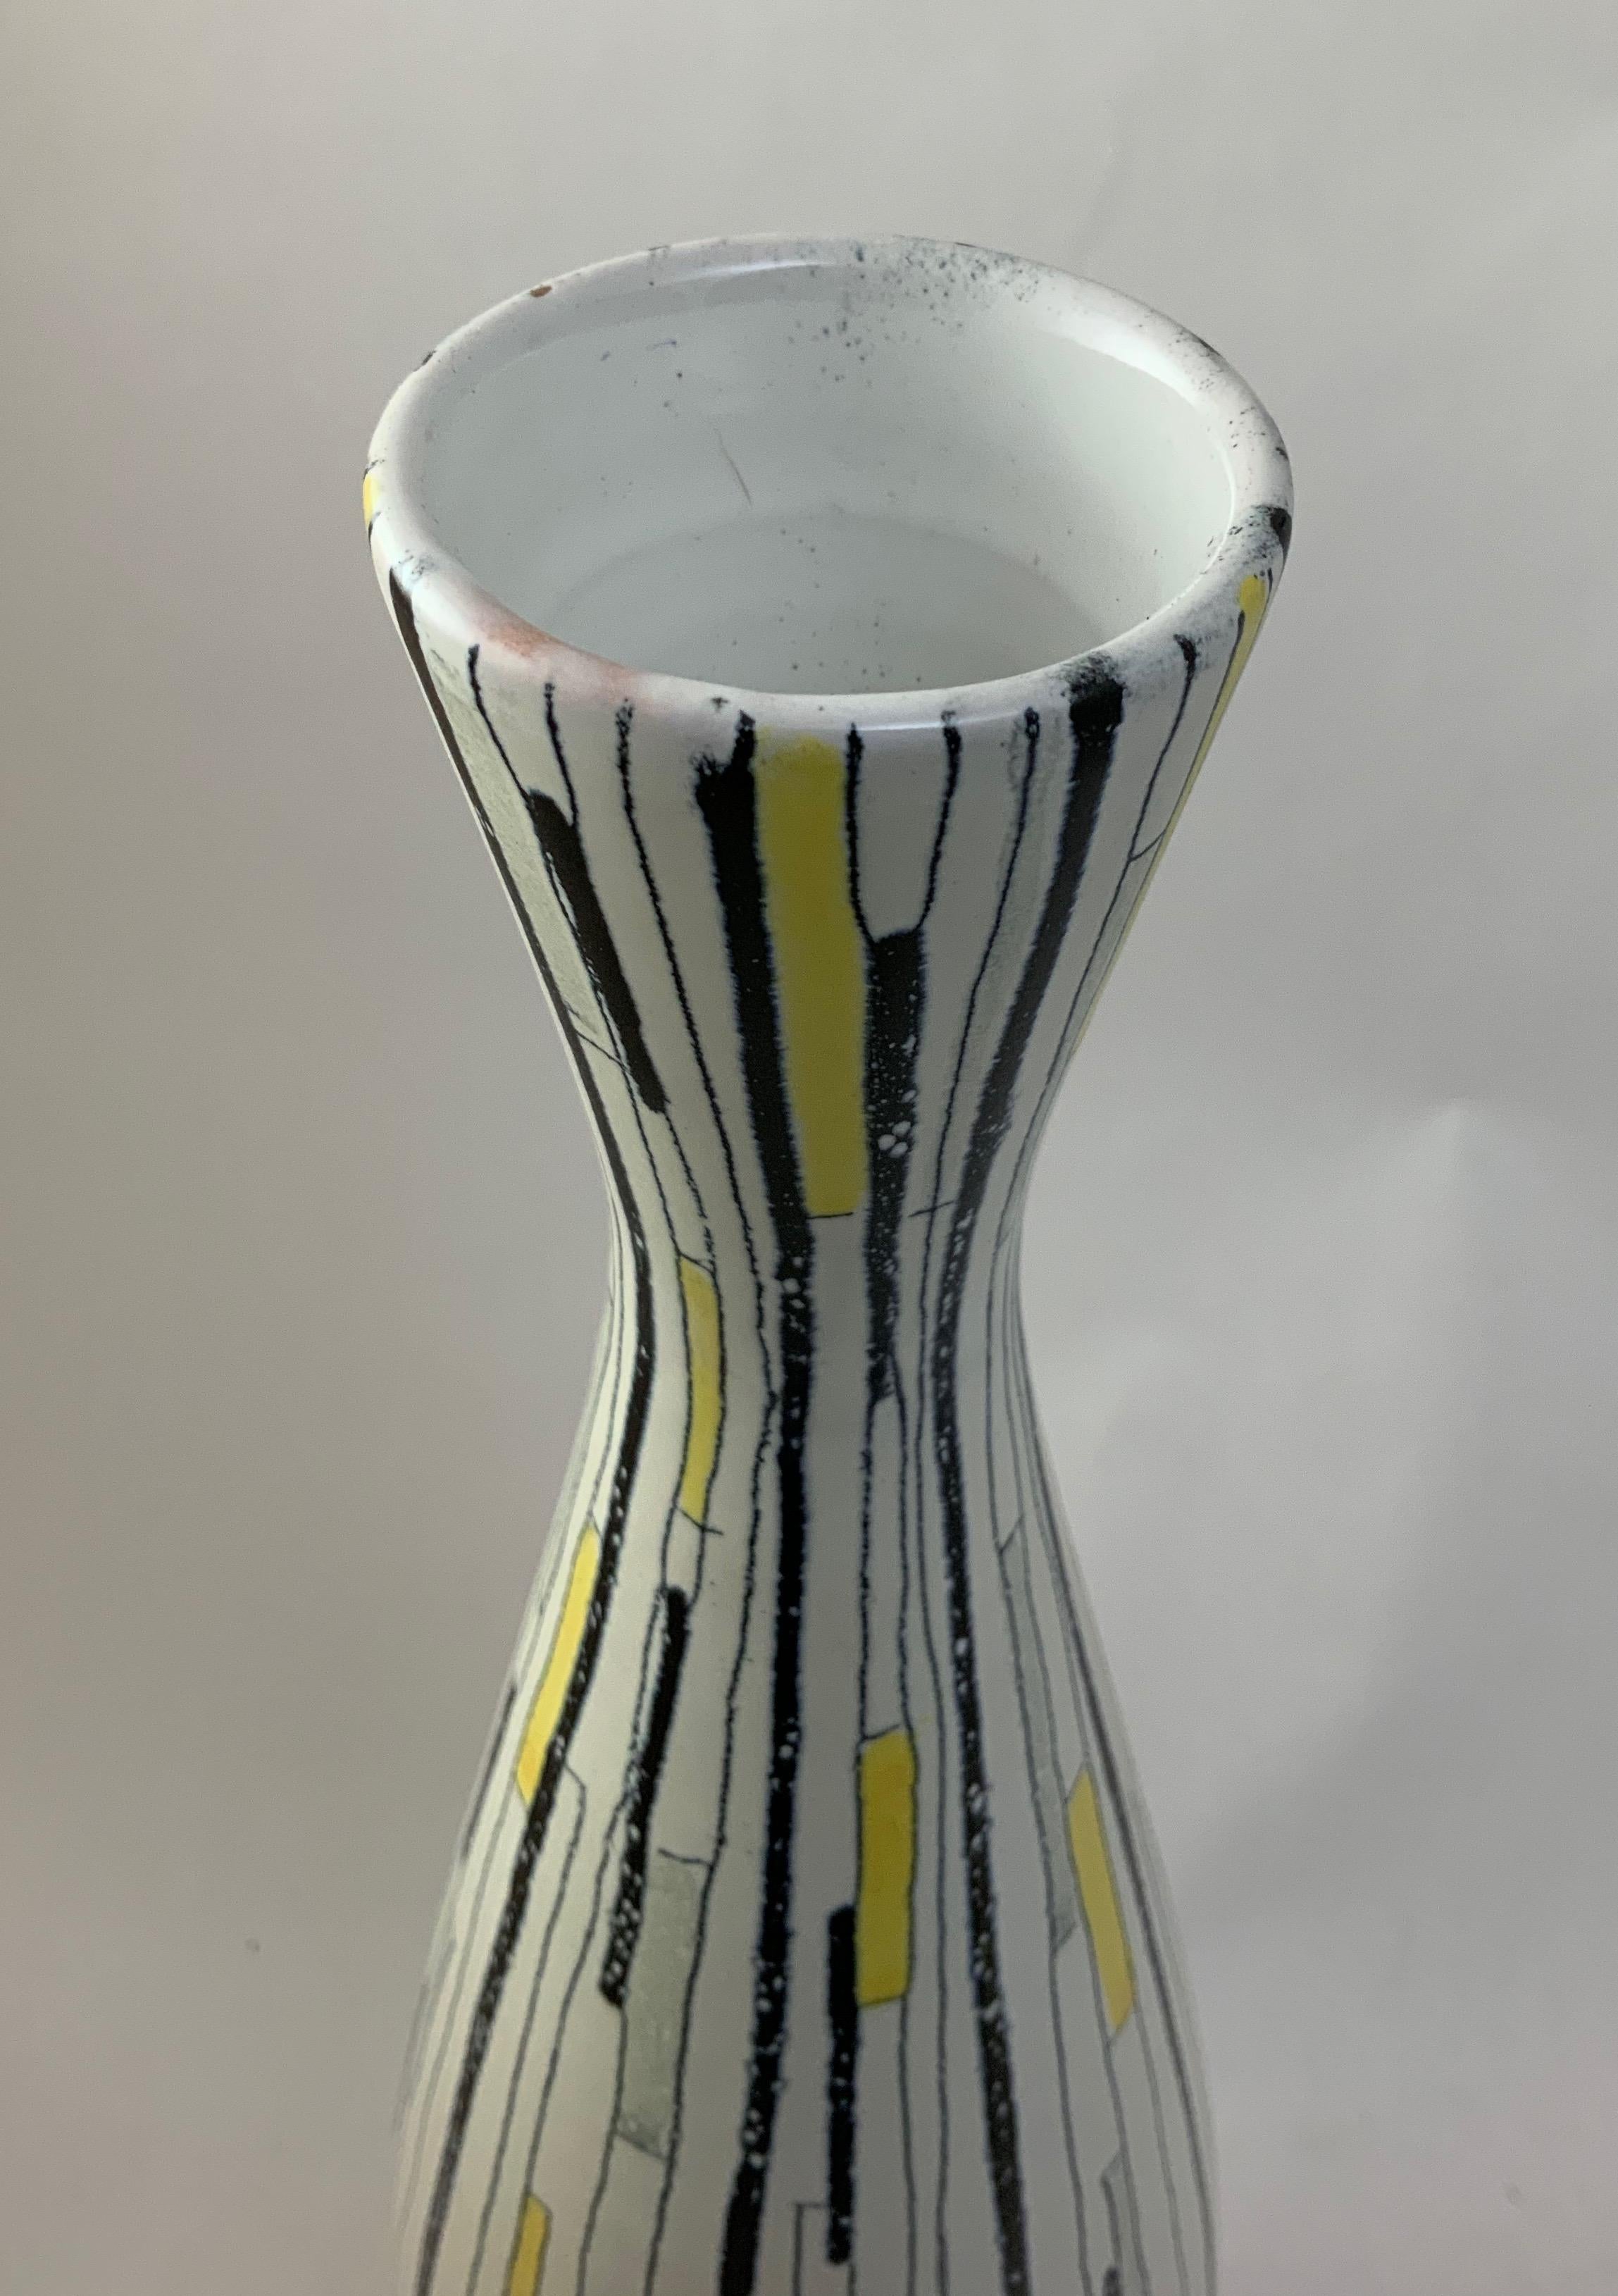 Tall Aldo Londi for Bitossi Patchwork Vase In Good Condition For Sale In Garnerville, NY